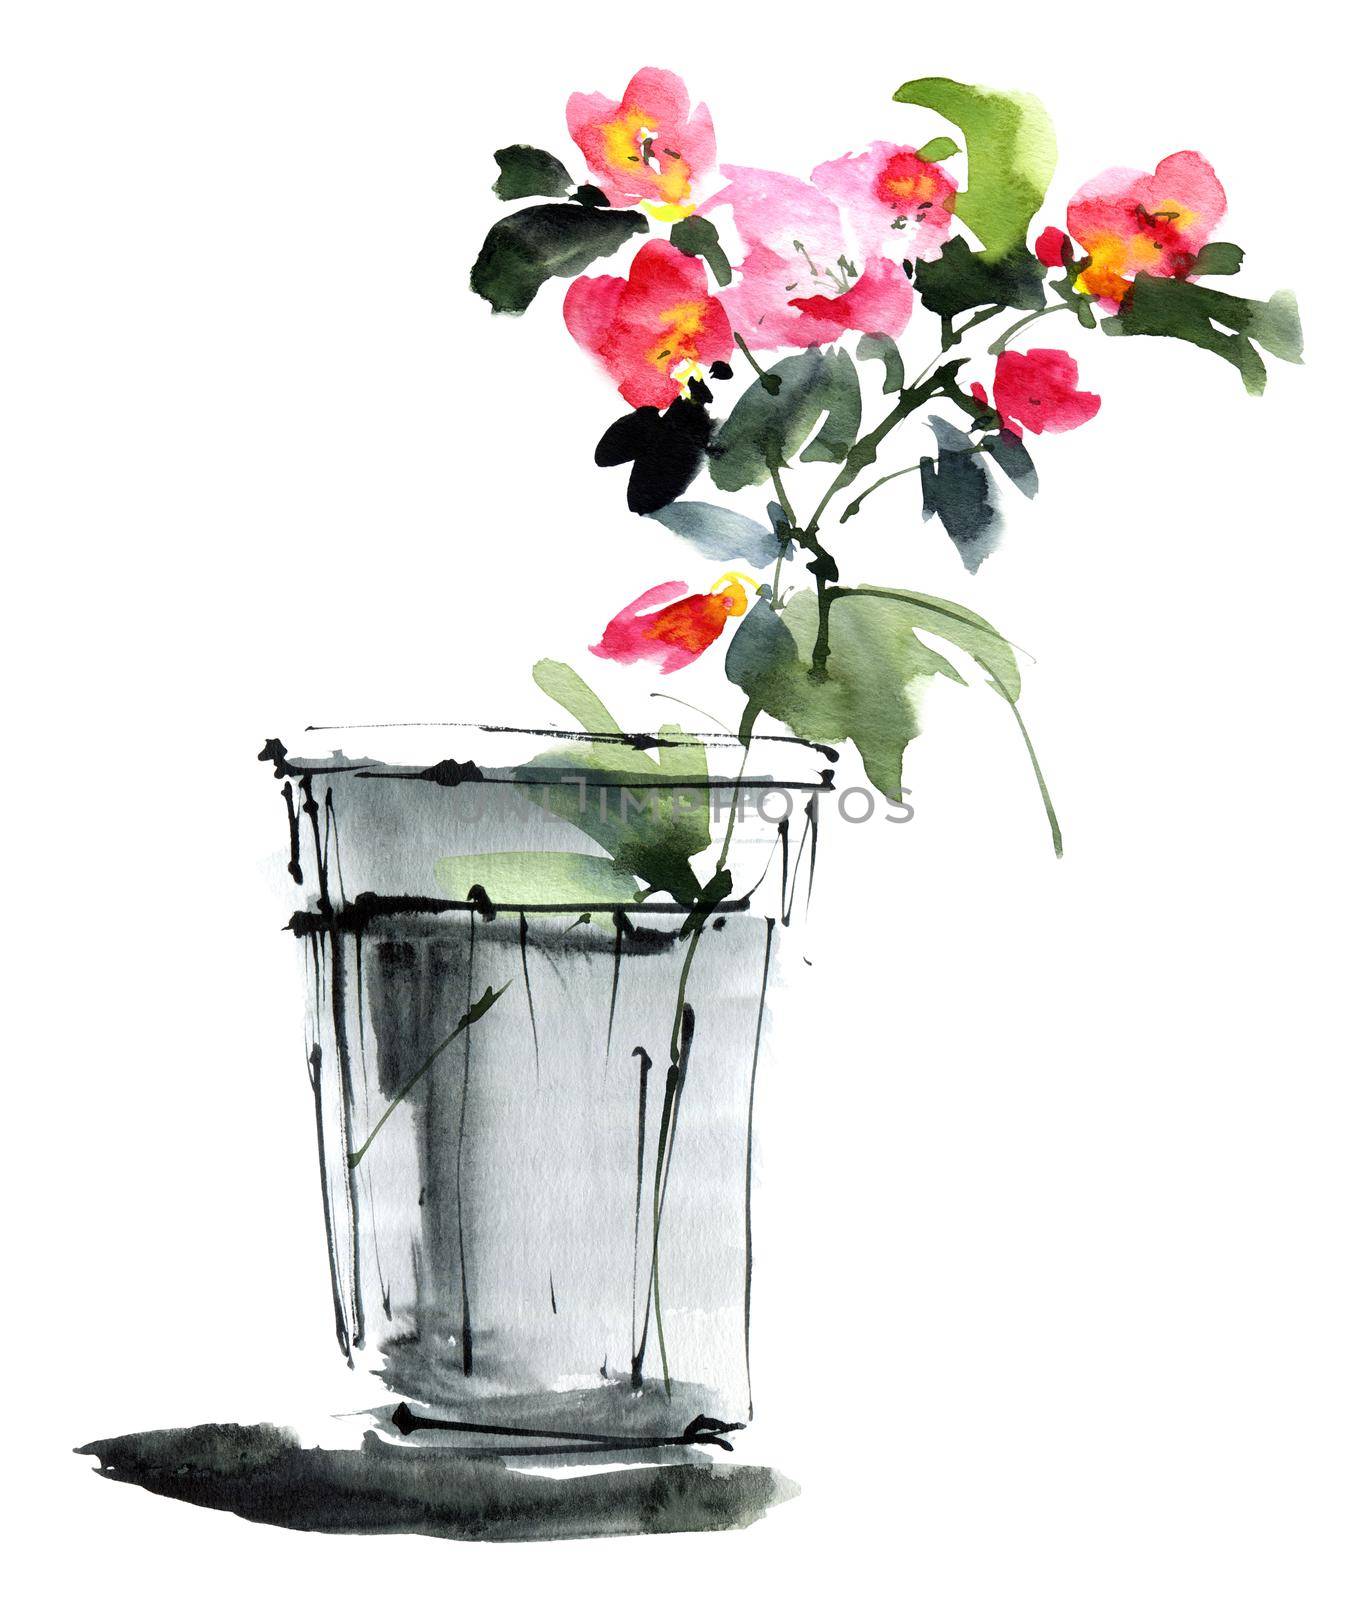 Watercolor and ink illustration of flowers - blossom plant with pink flowers and buds in the glass vase. Sumi-e art.